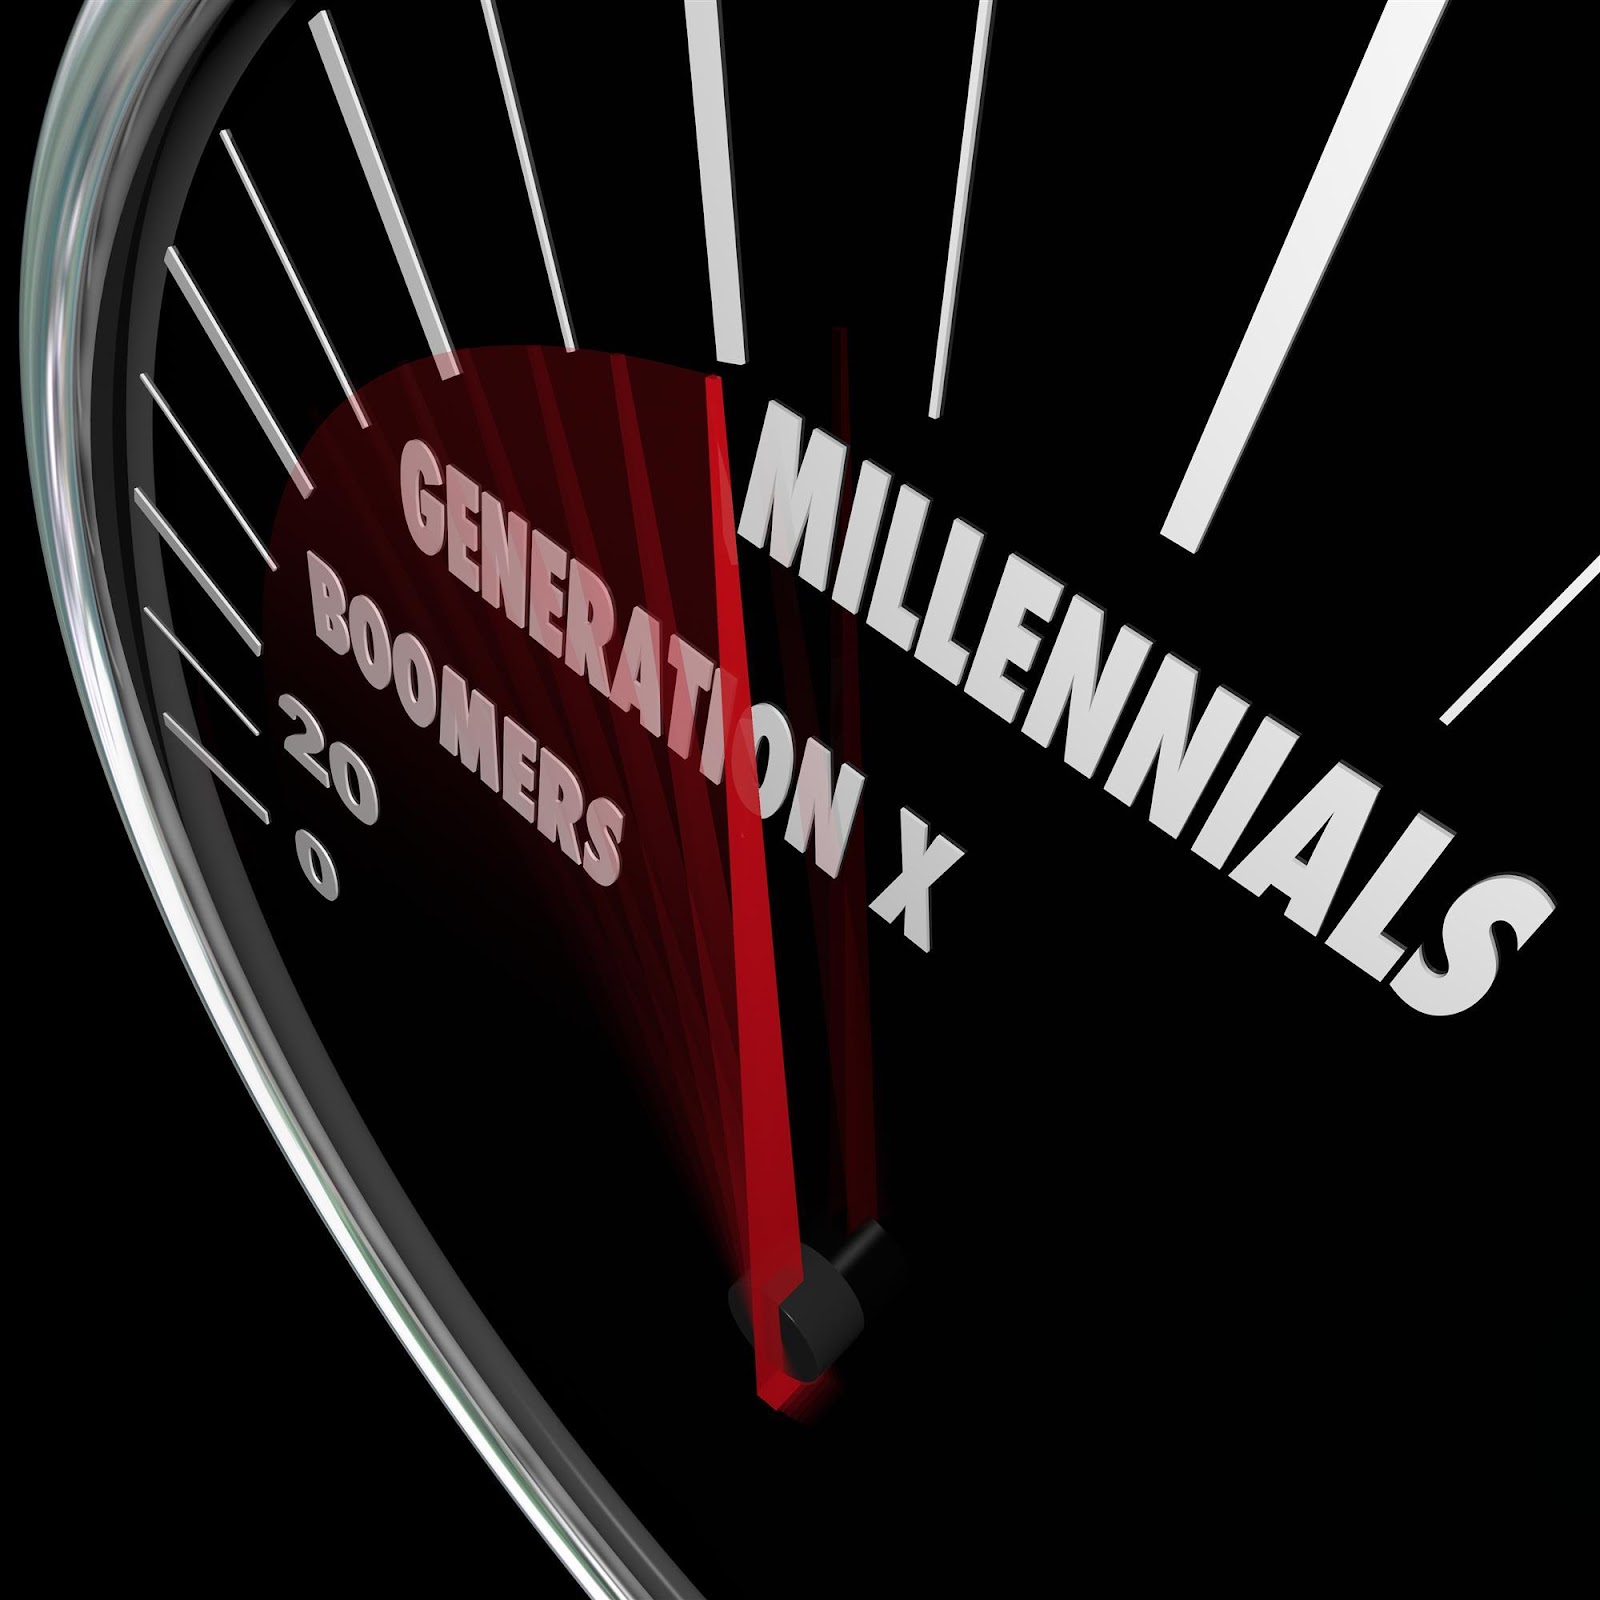 E:\Images\Millennials Generation X Baby Boomers Speedometer Ages(1).jpg